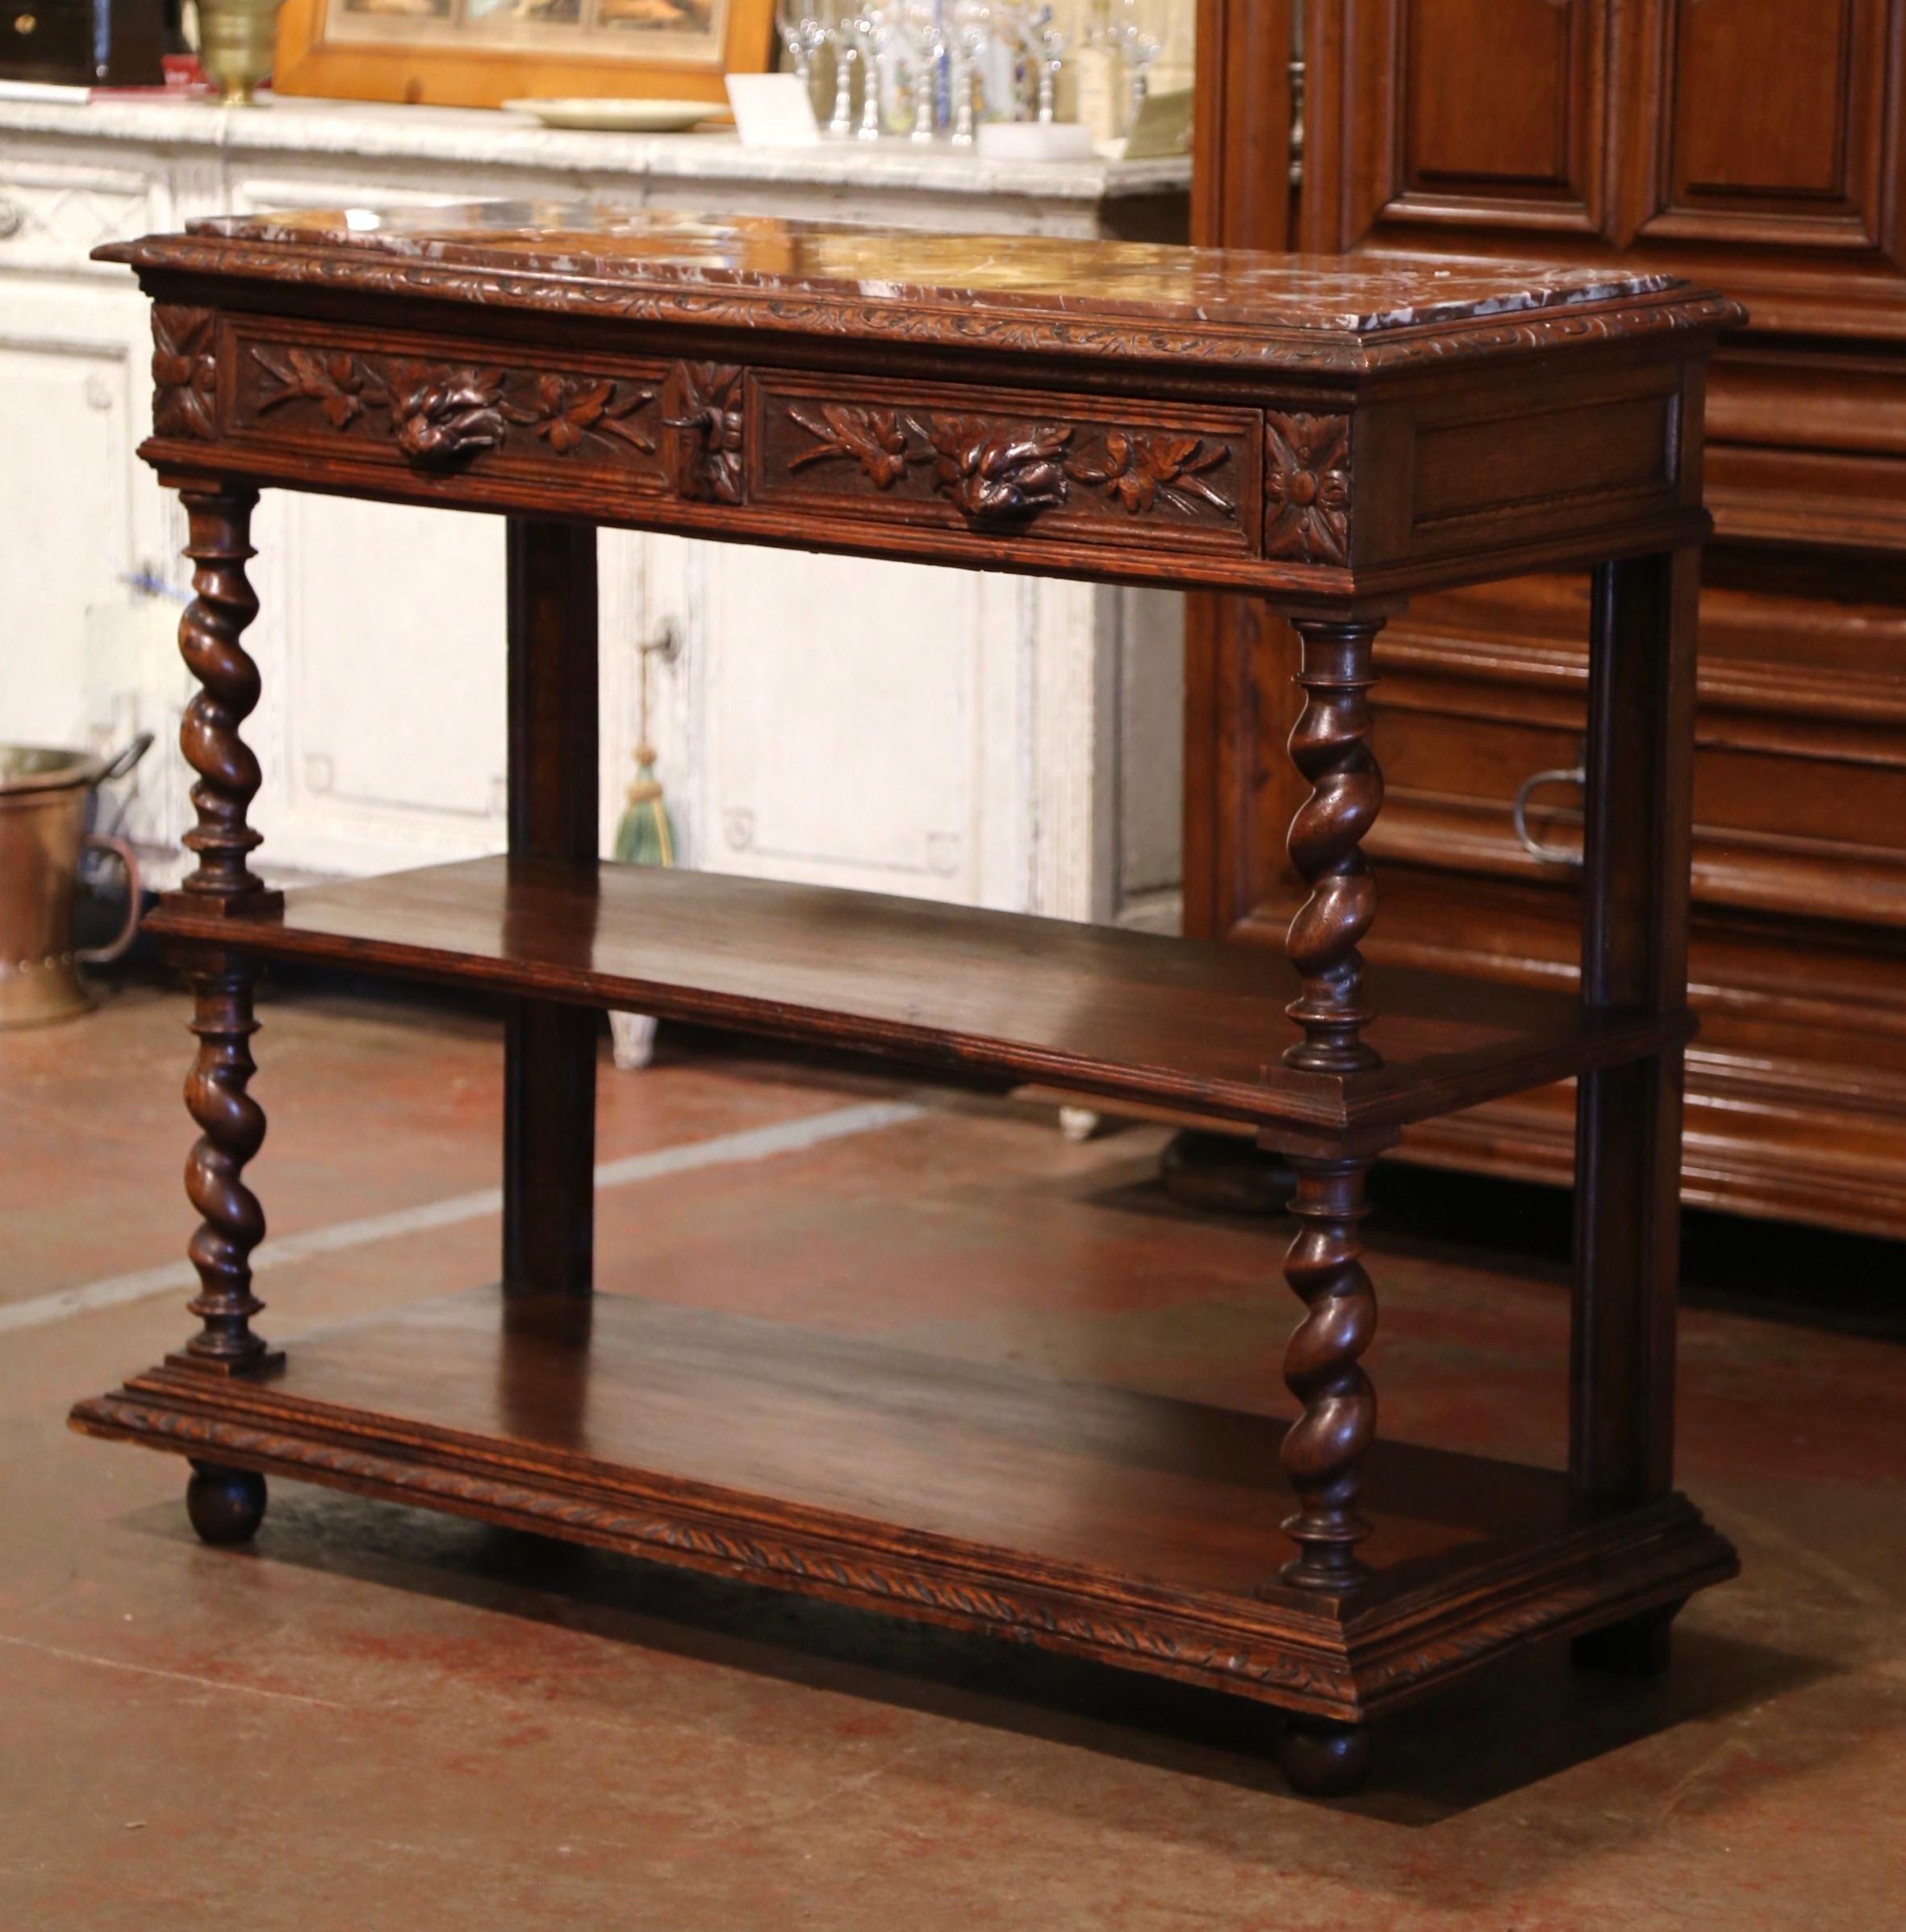 Crafted in France circa 1870, the antique Gothic style console stands on barley twist legs ending with bun feet, over a decorative plinth base. The desserte is dressed with a variegated red marble surface set inside a carved edge rectangular frame,